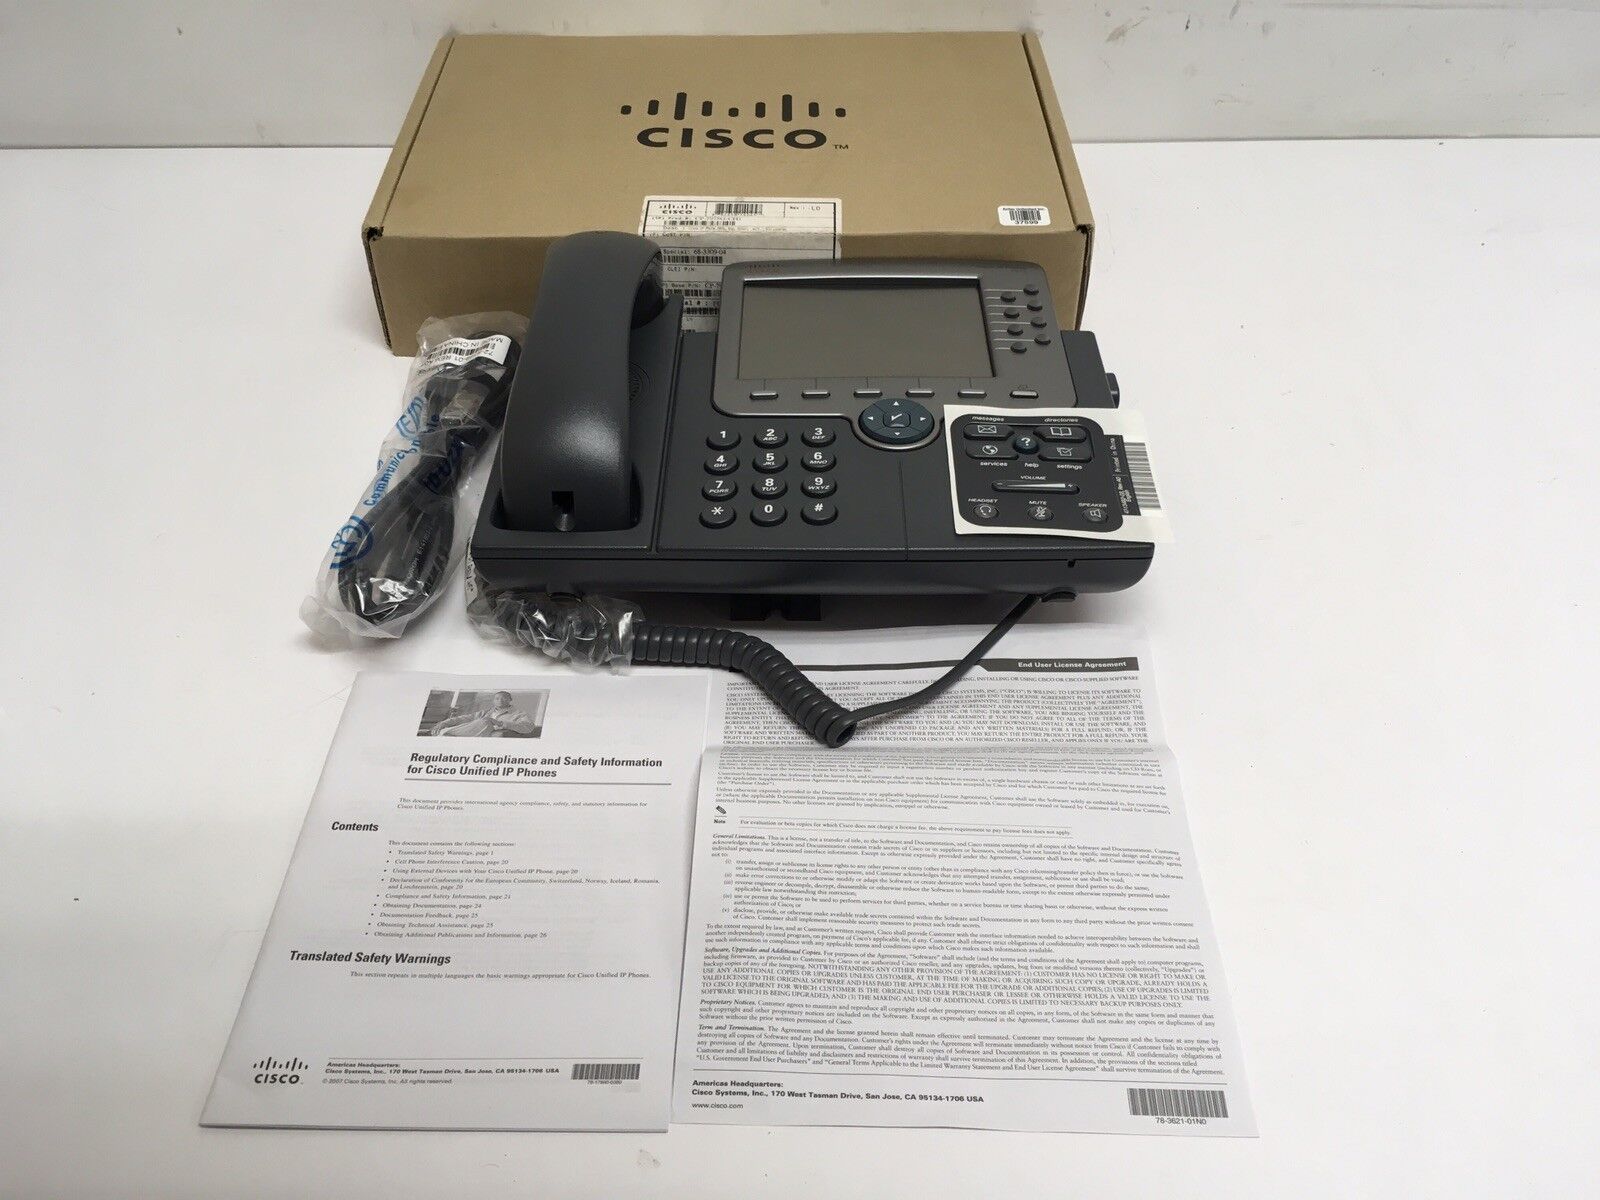 NEW in Box Cisco CP-7975G Eight Line Color Display Unified IP Phone VoIP